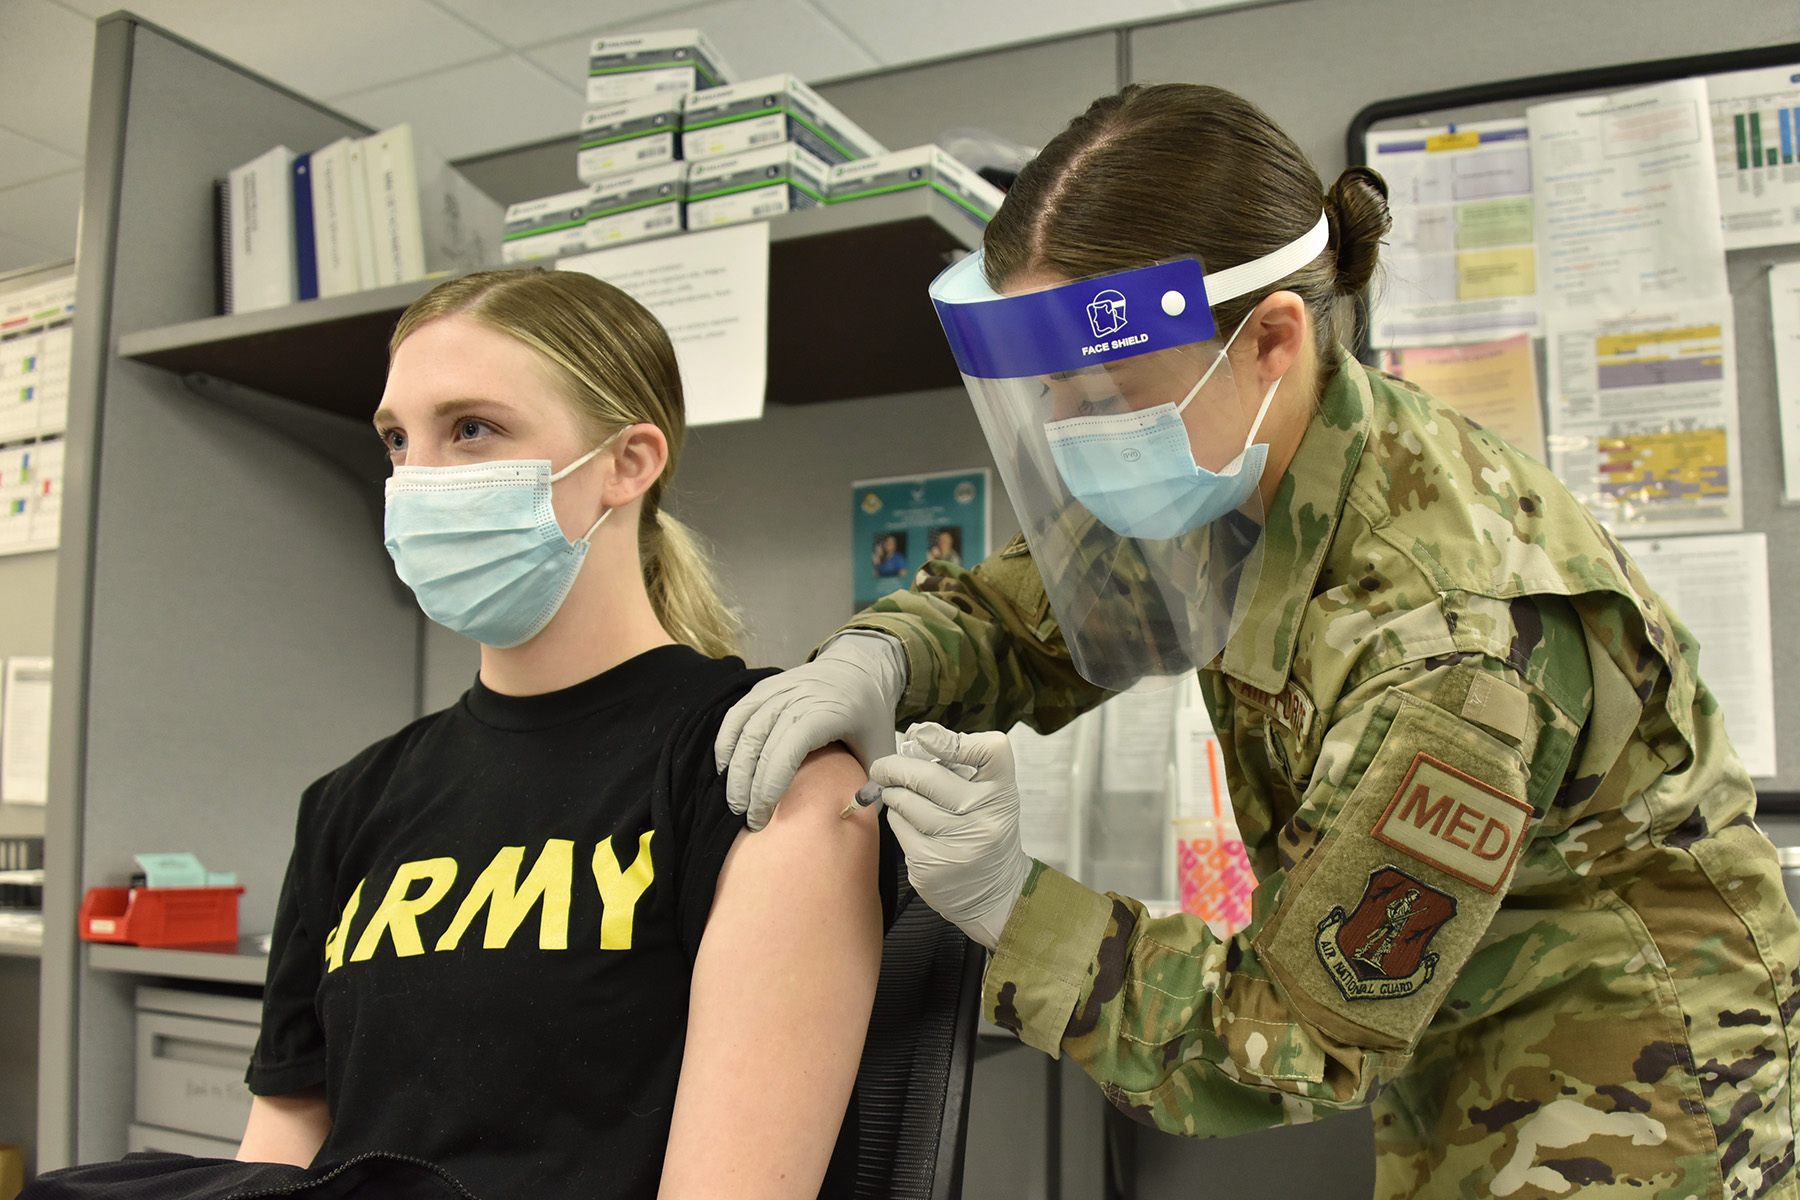 184th Medical Group administers COVID-19 shots to Kansas Soldiers